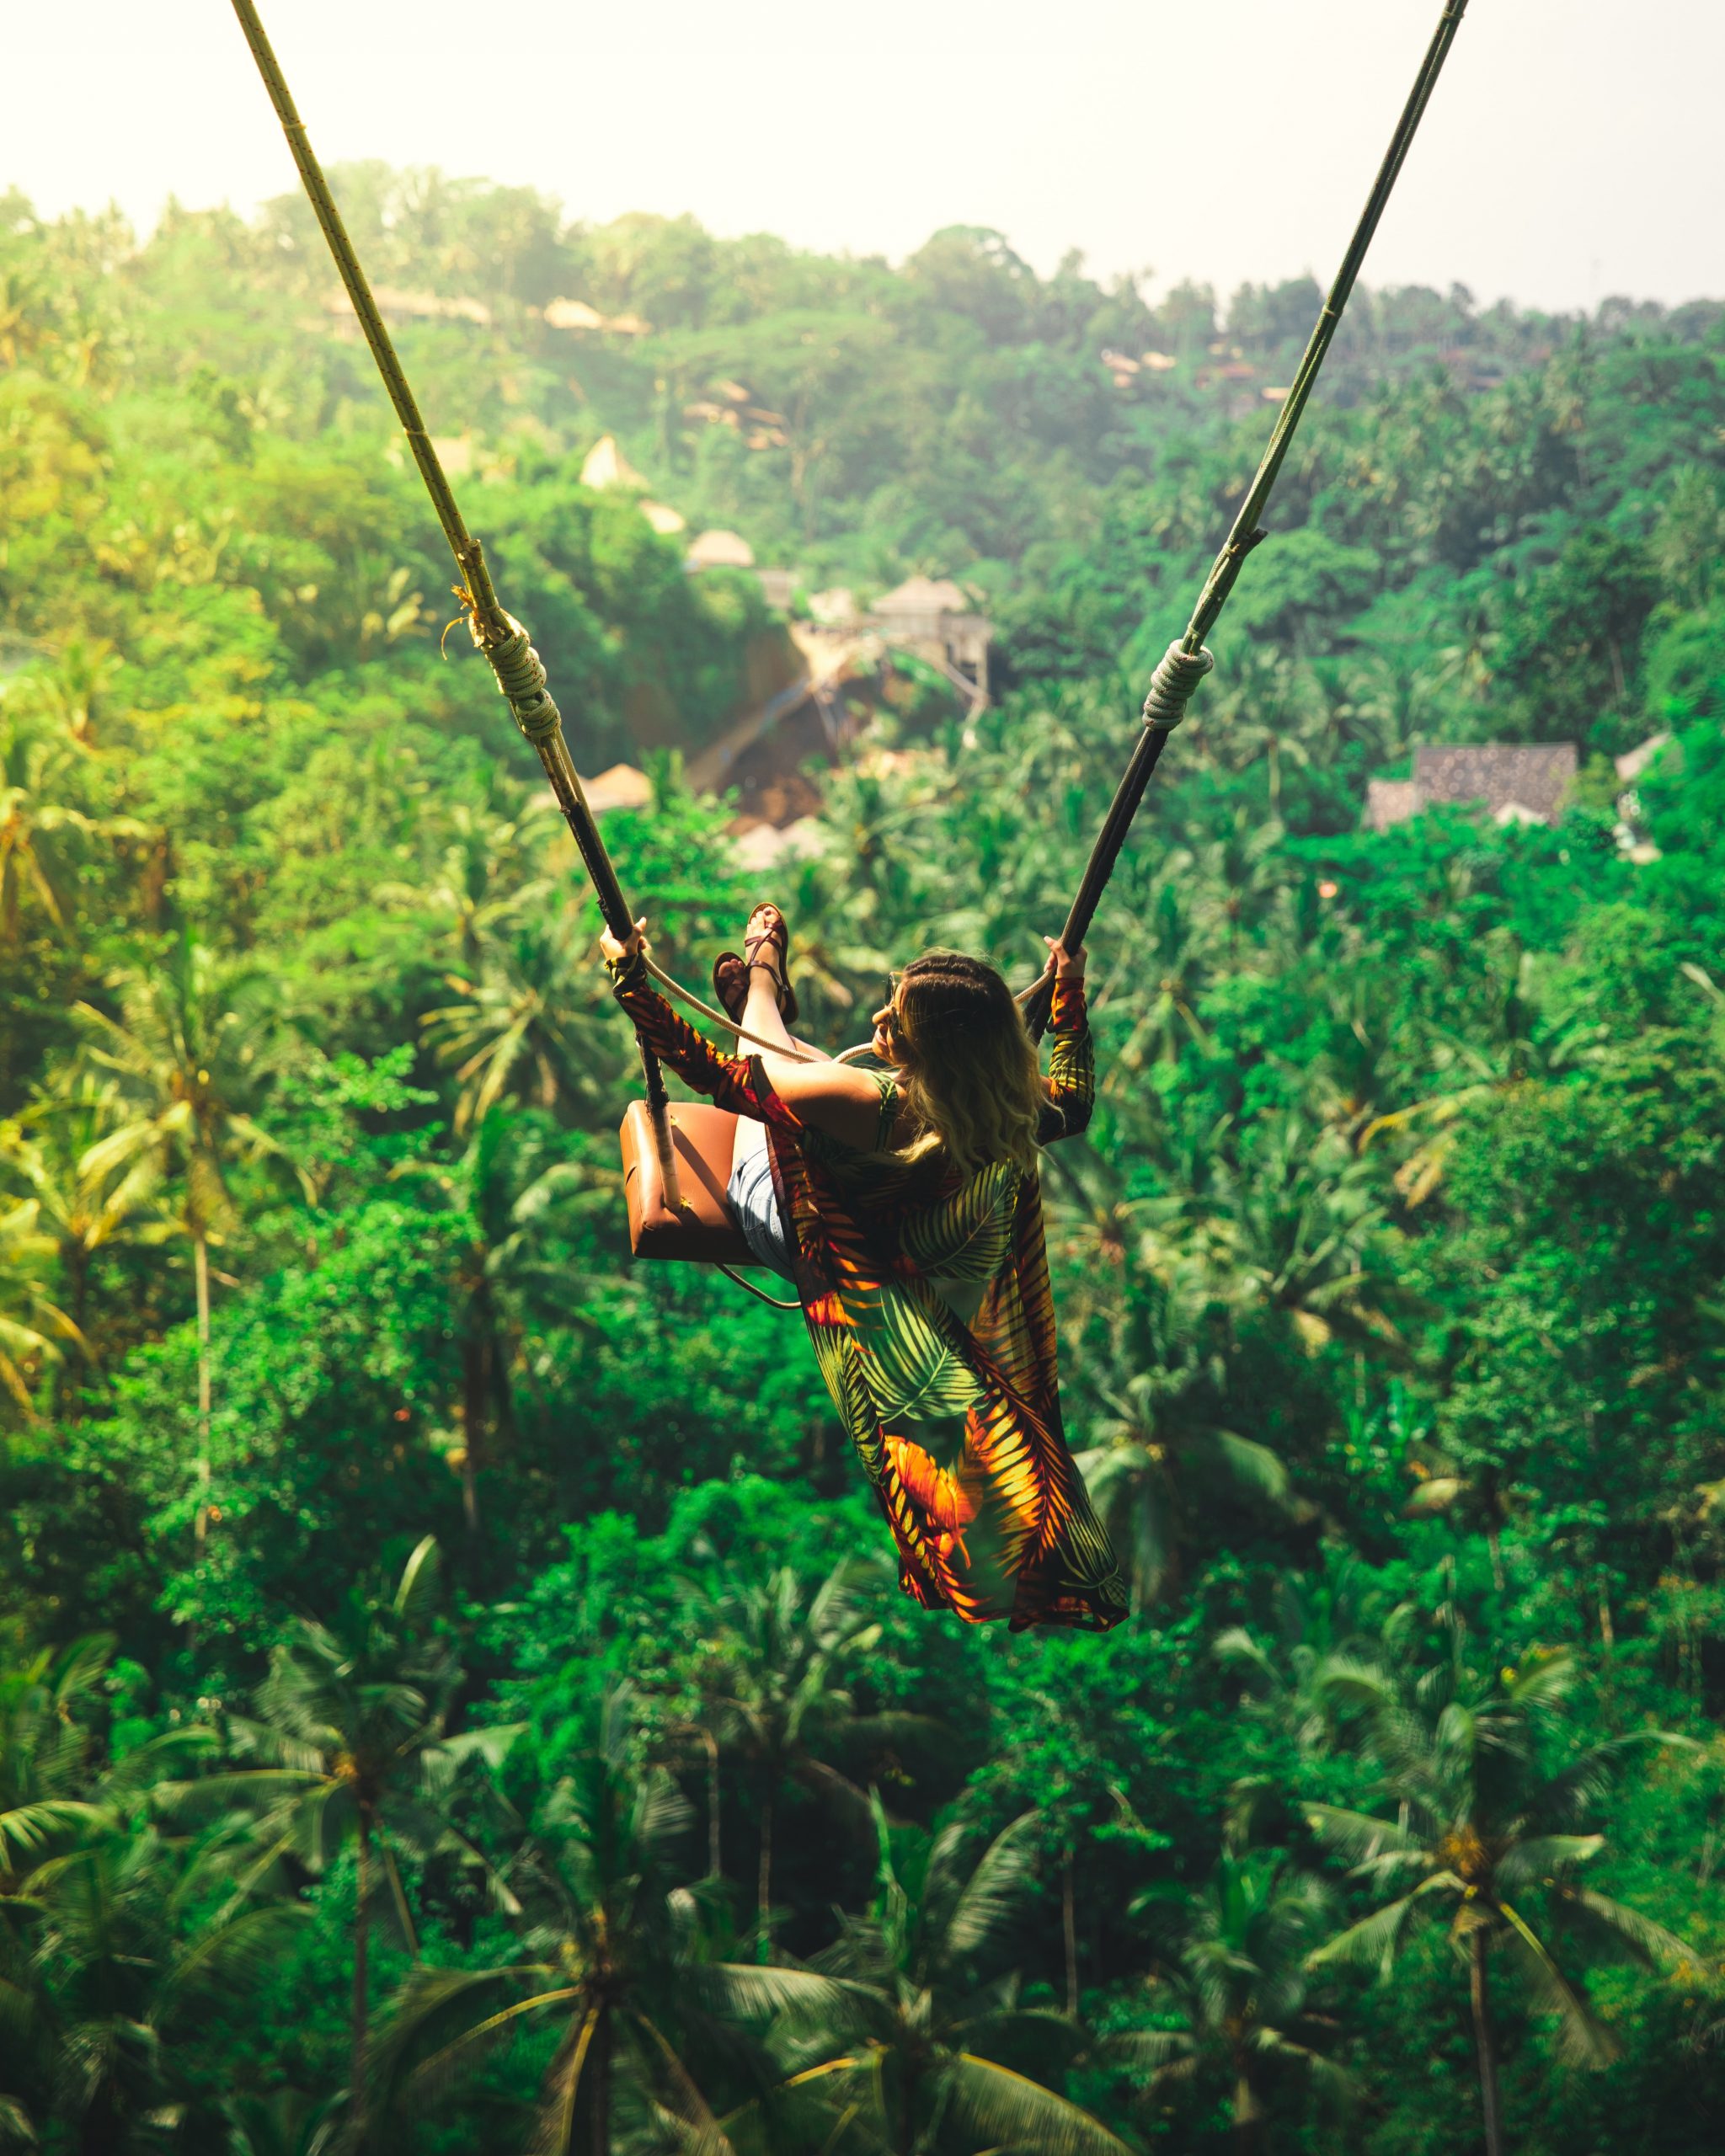 Bali Swing, Bali, Indonesia - Best 20 Destinations for Europeans